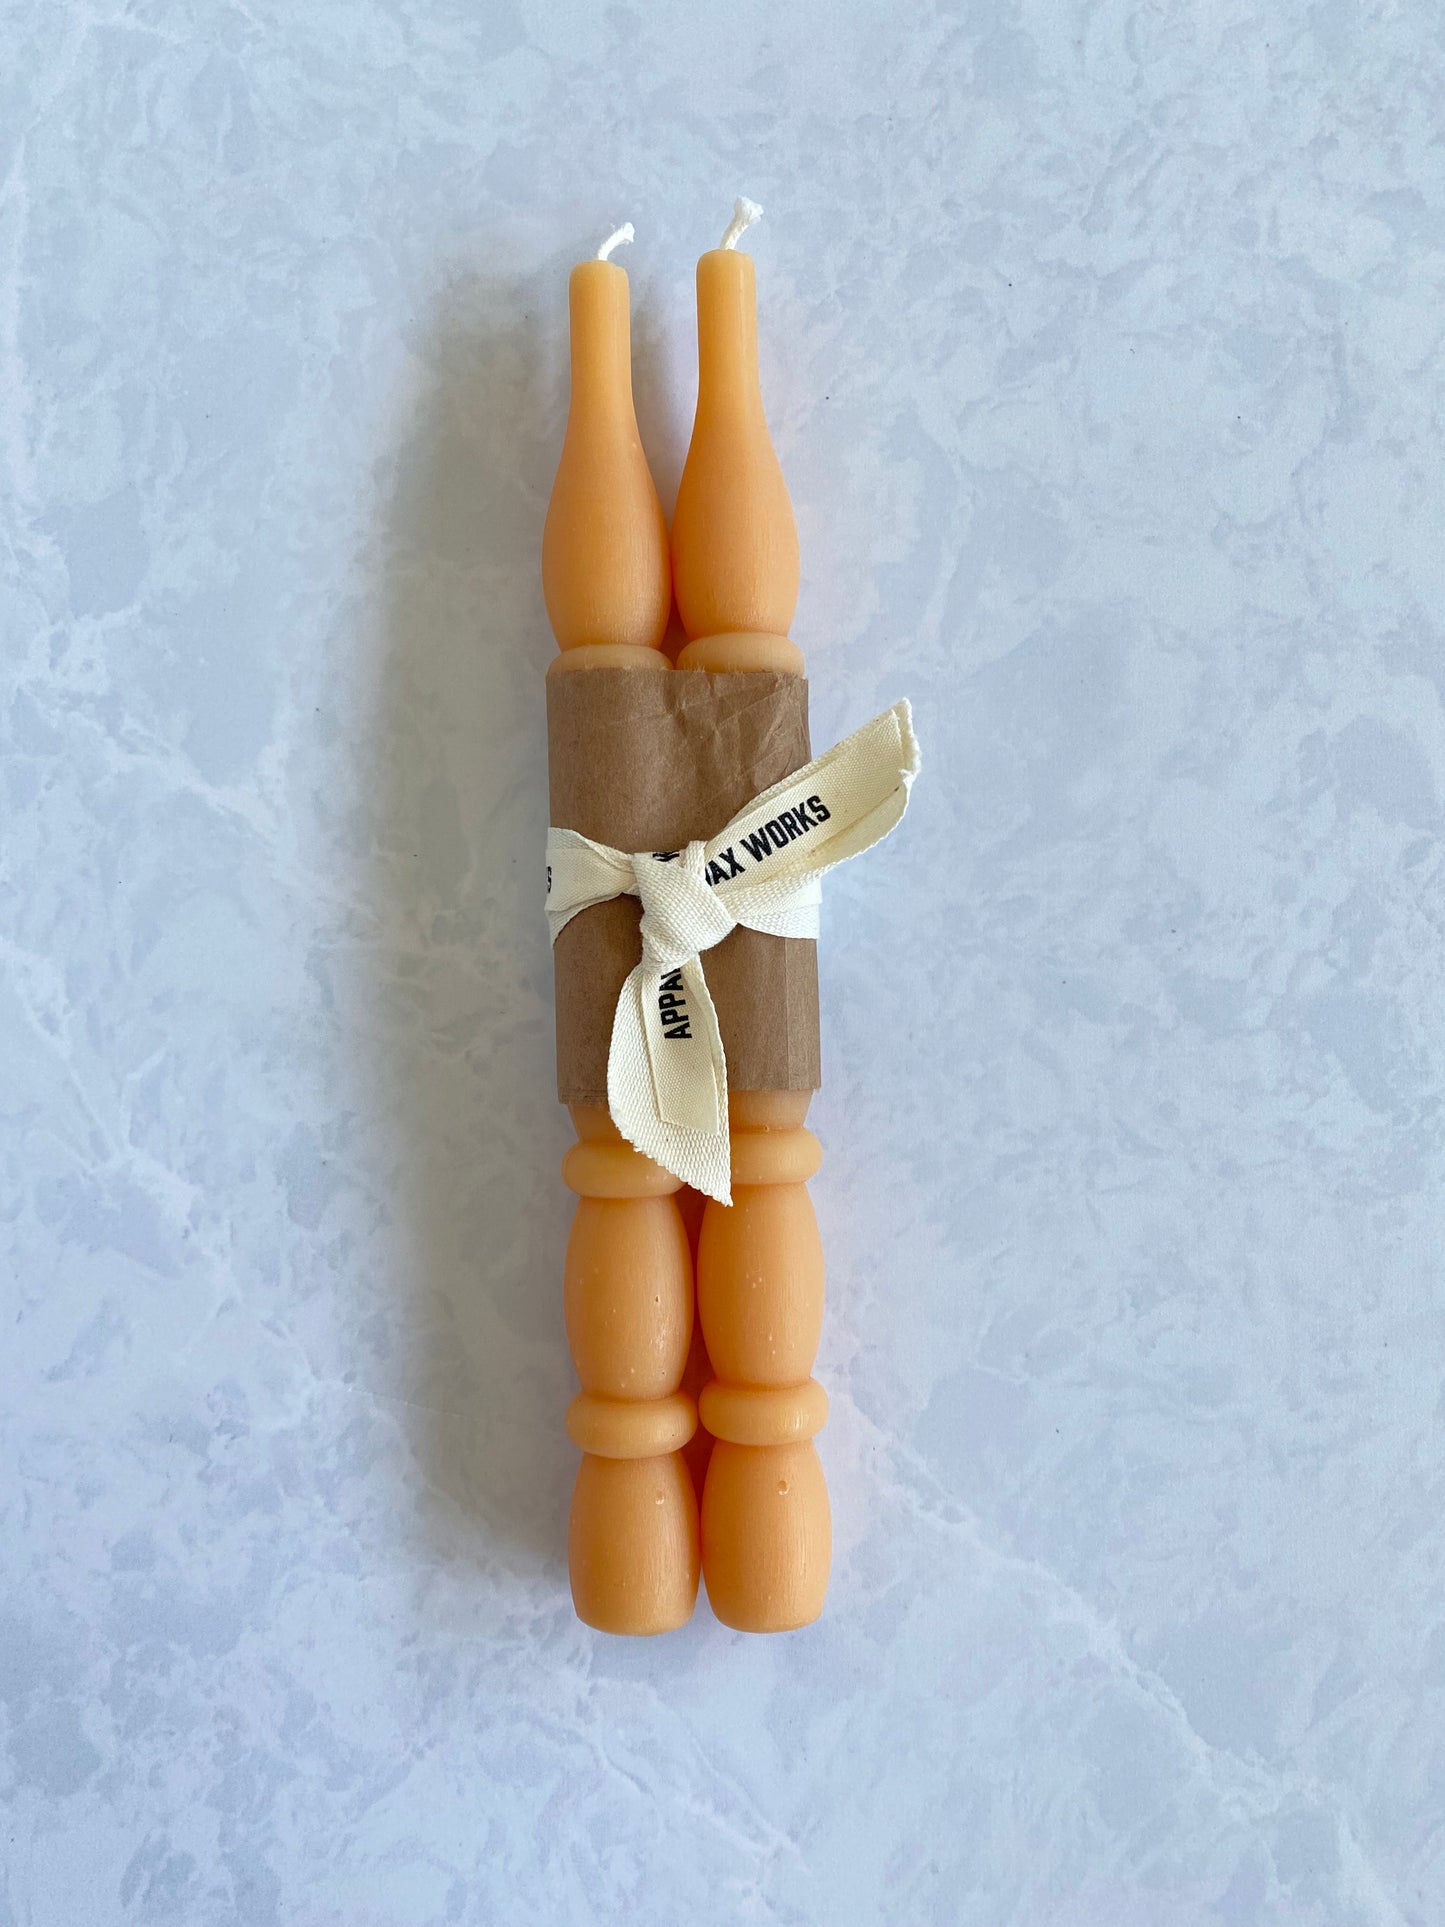 Unique Spindle Shape Beeswax Taper Candle in Peach Color for Sale